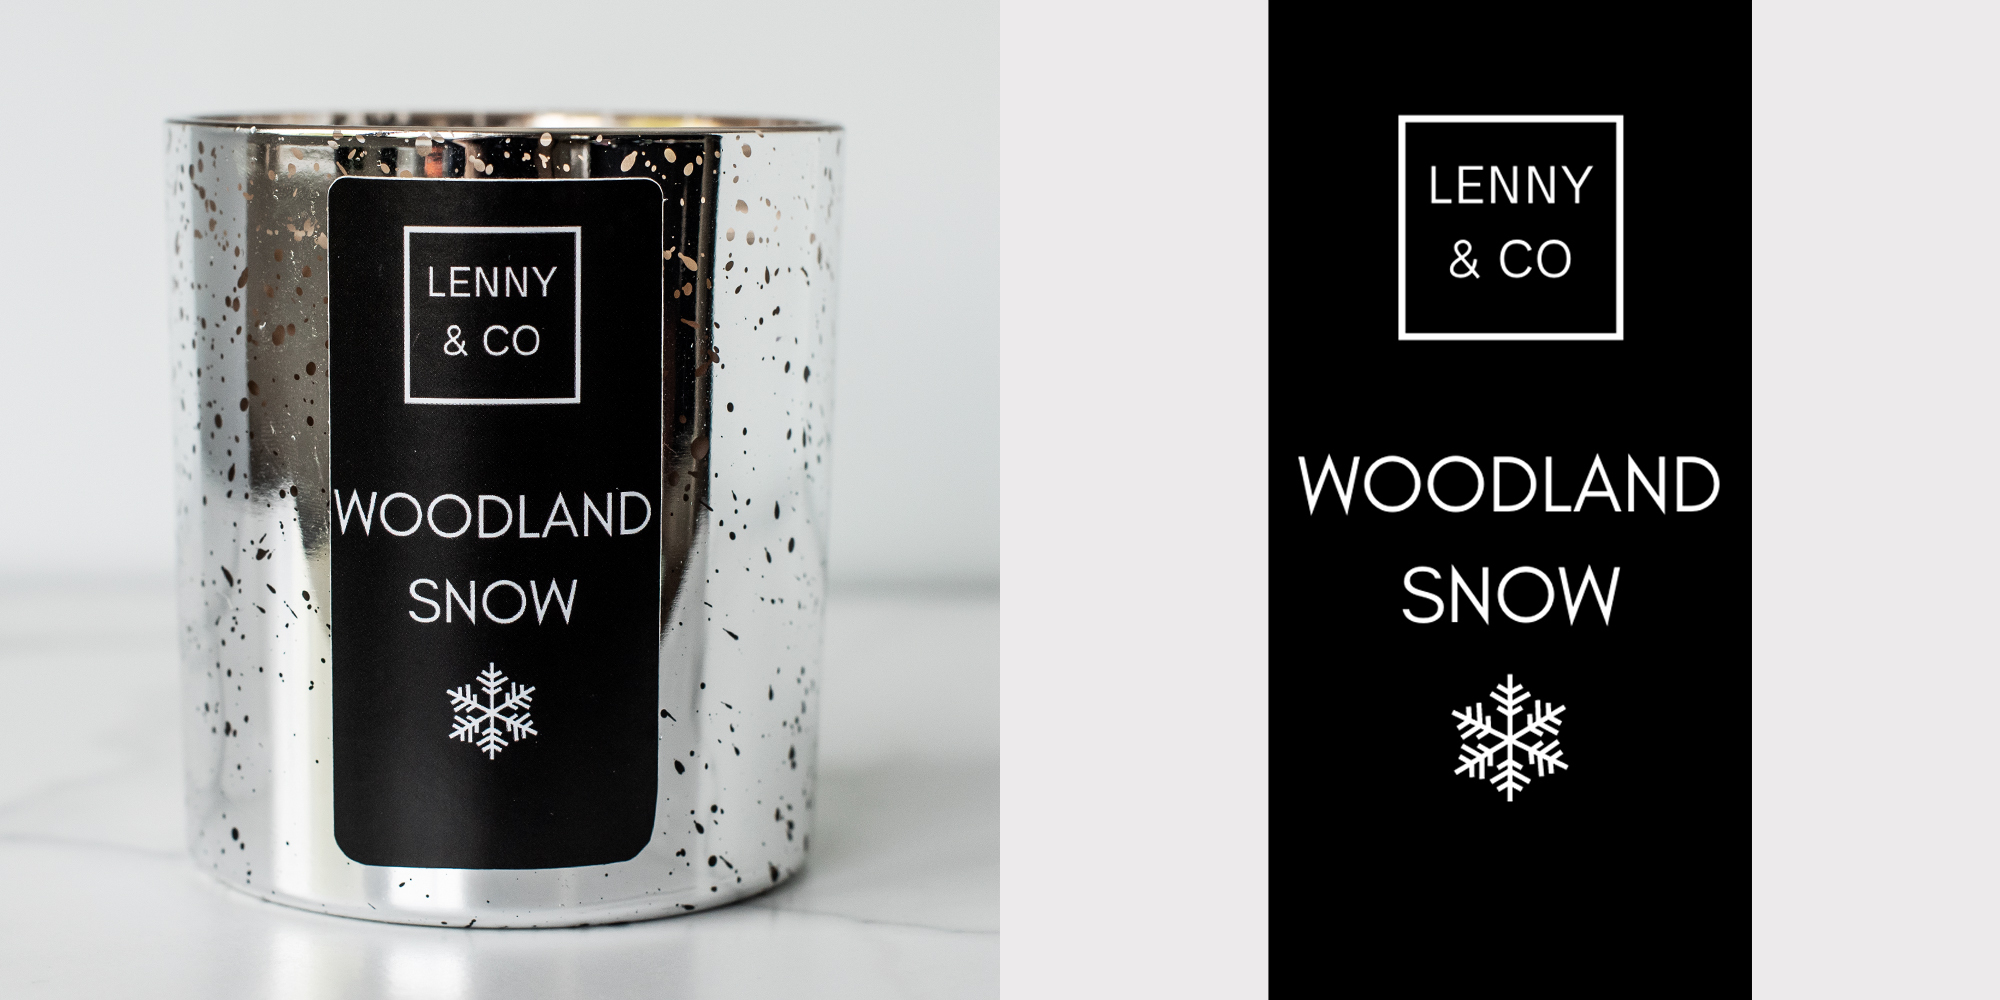 Woodland Snow fragrance oil candle and label.